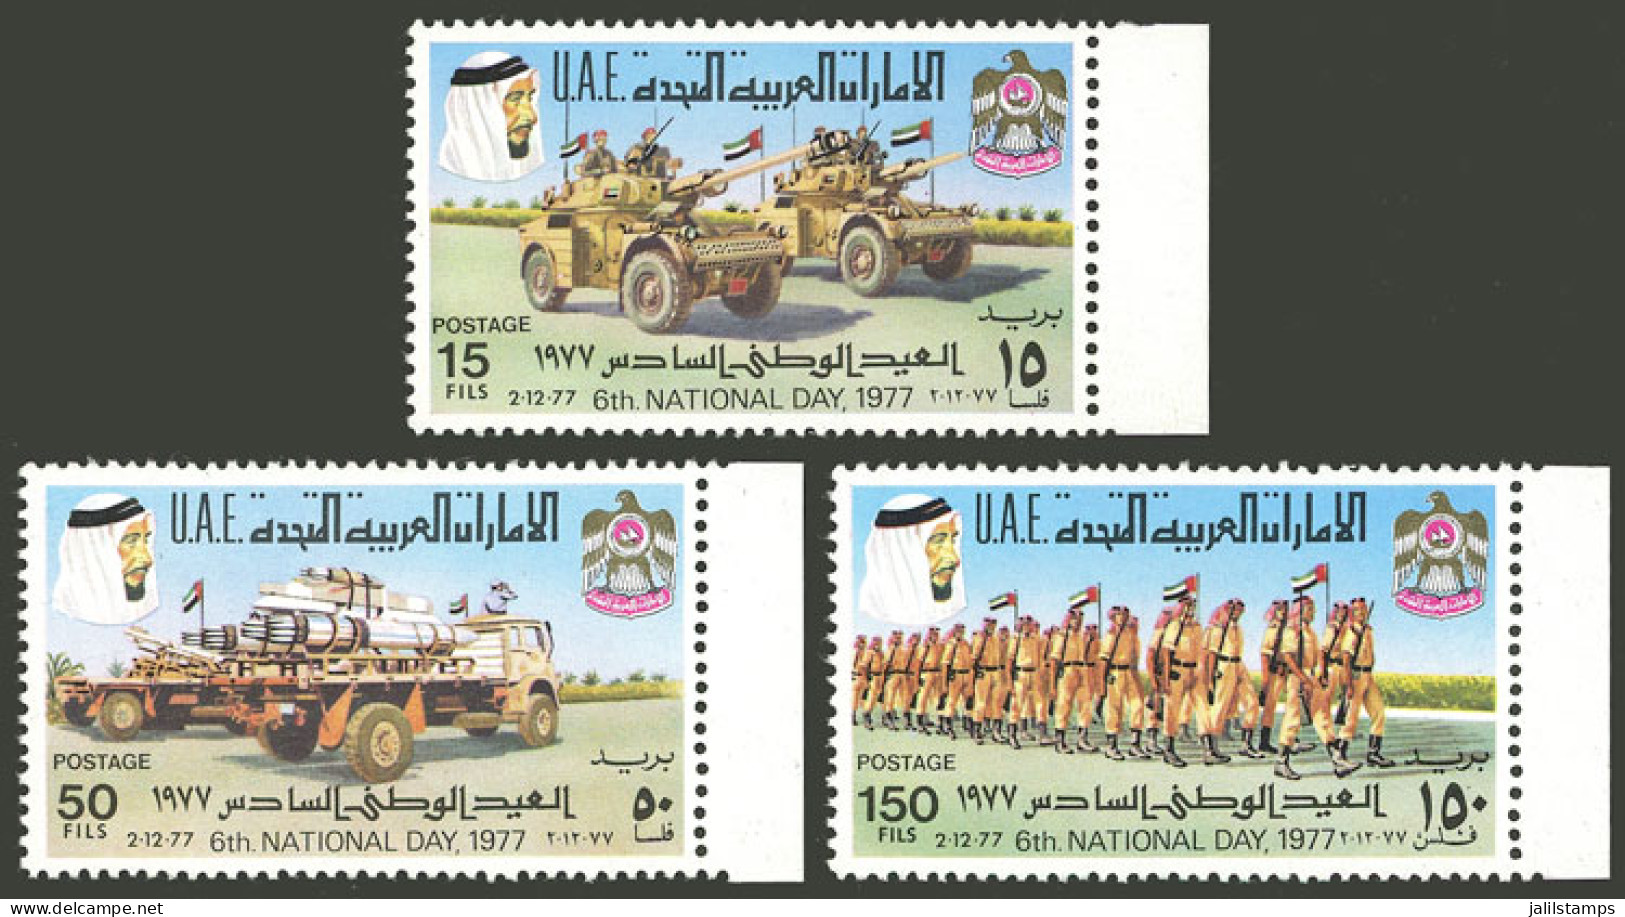 UNITED ARAB EMIRATES: 1977 National Day (soldiers And War Vehicules), Complete Set Of 3 Values Prepared But Unissued, MN - United Arab Emirates (General)